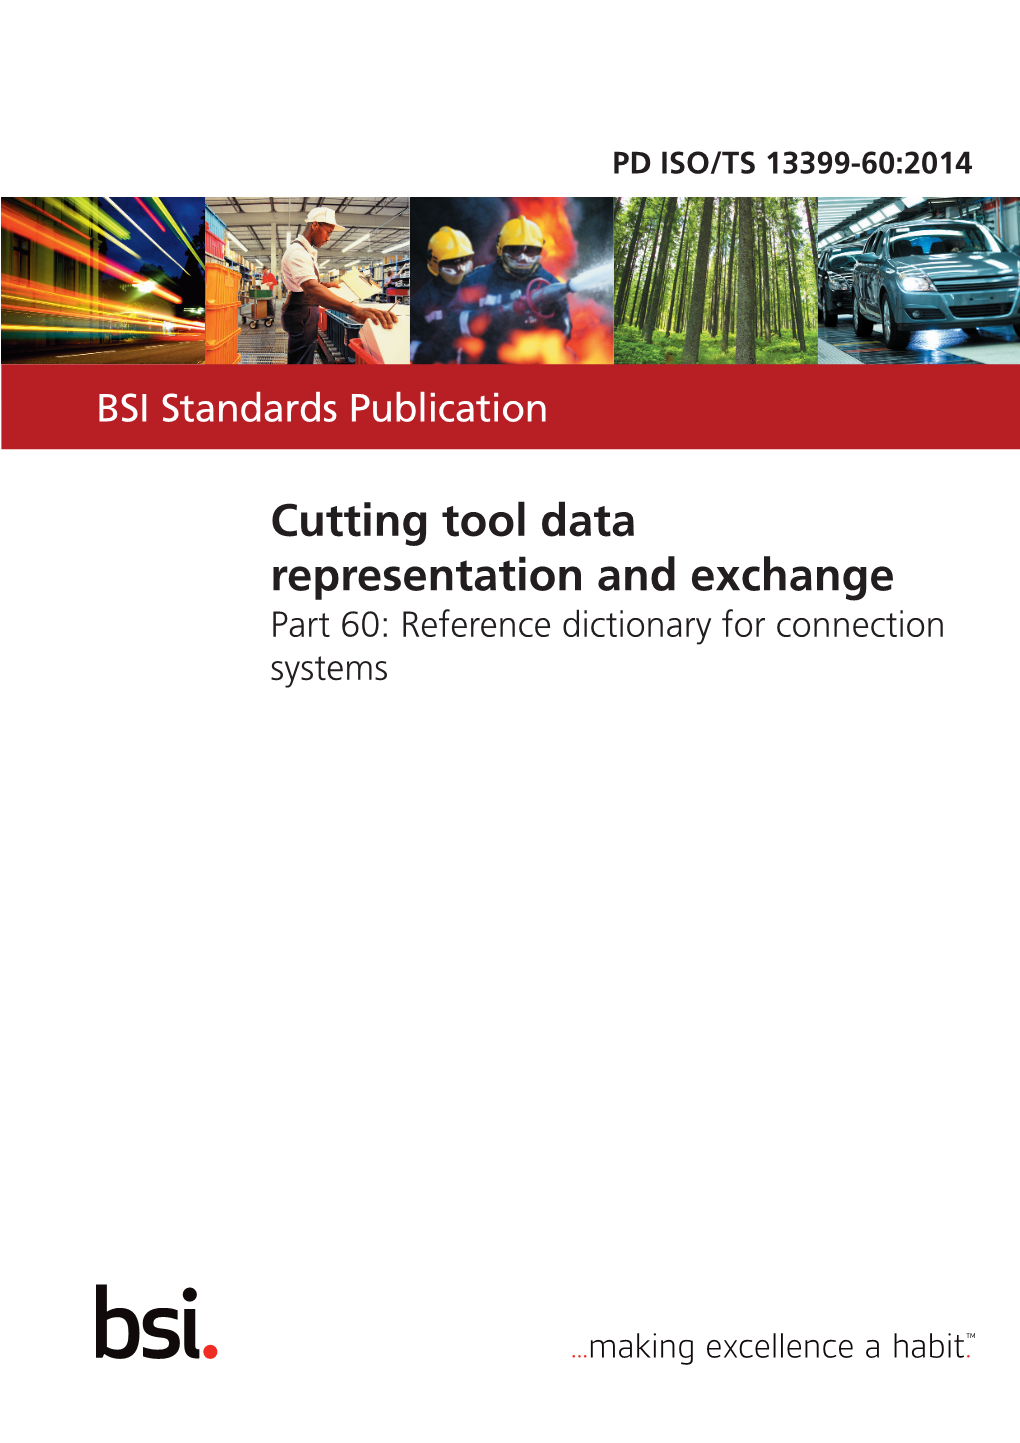 Cutting Tool Data Representation and Exchange Part 60: Reference Dictionary for Connection Systems PD ISO/TS 13399-60:2014 PUBLISHED DOCUMENT